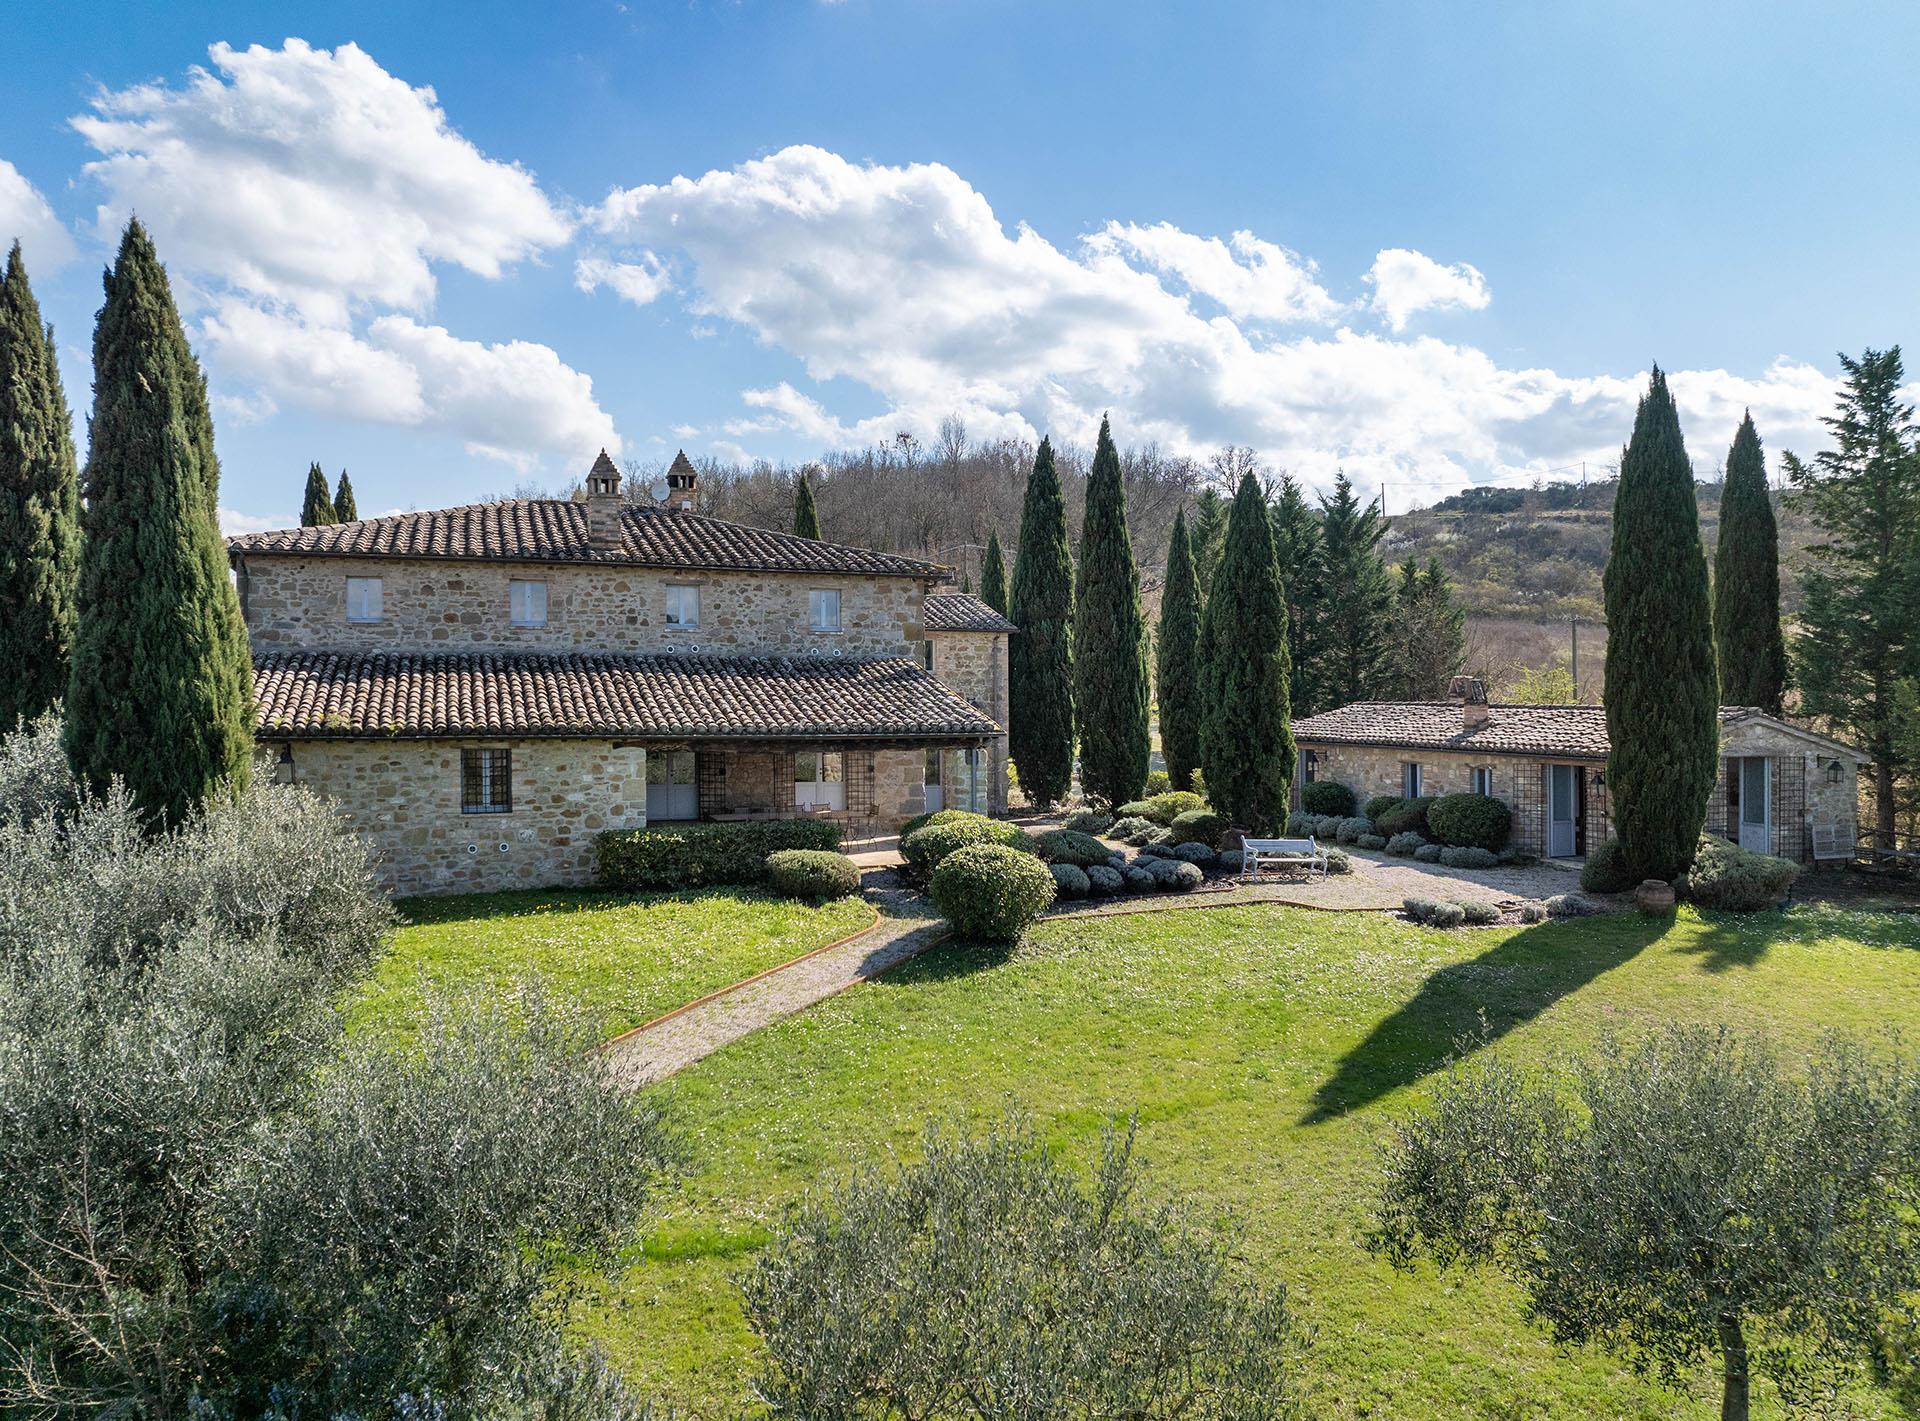 Charming farmhouse in the Umbrian countryside